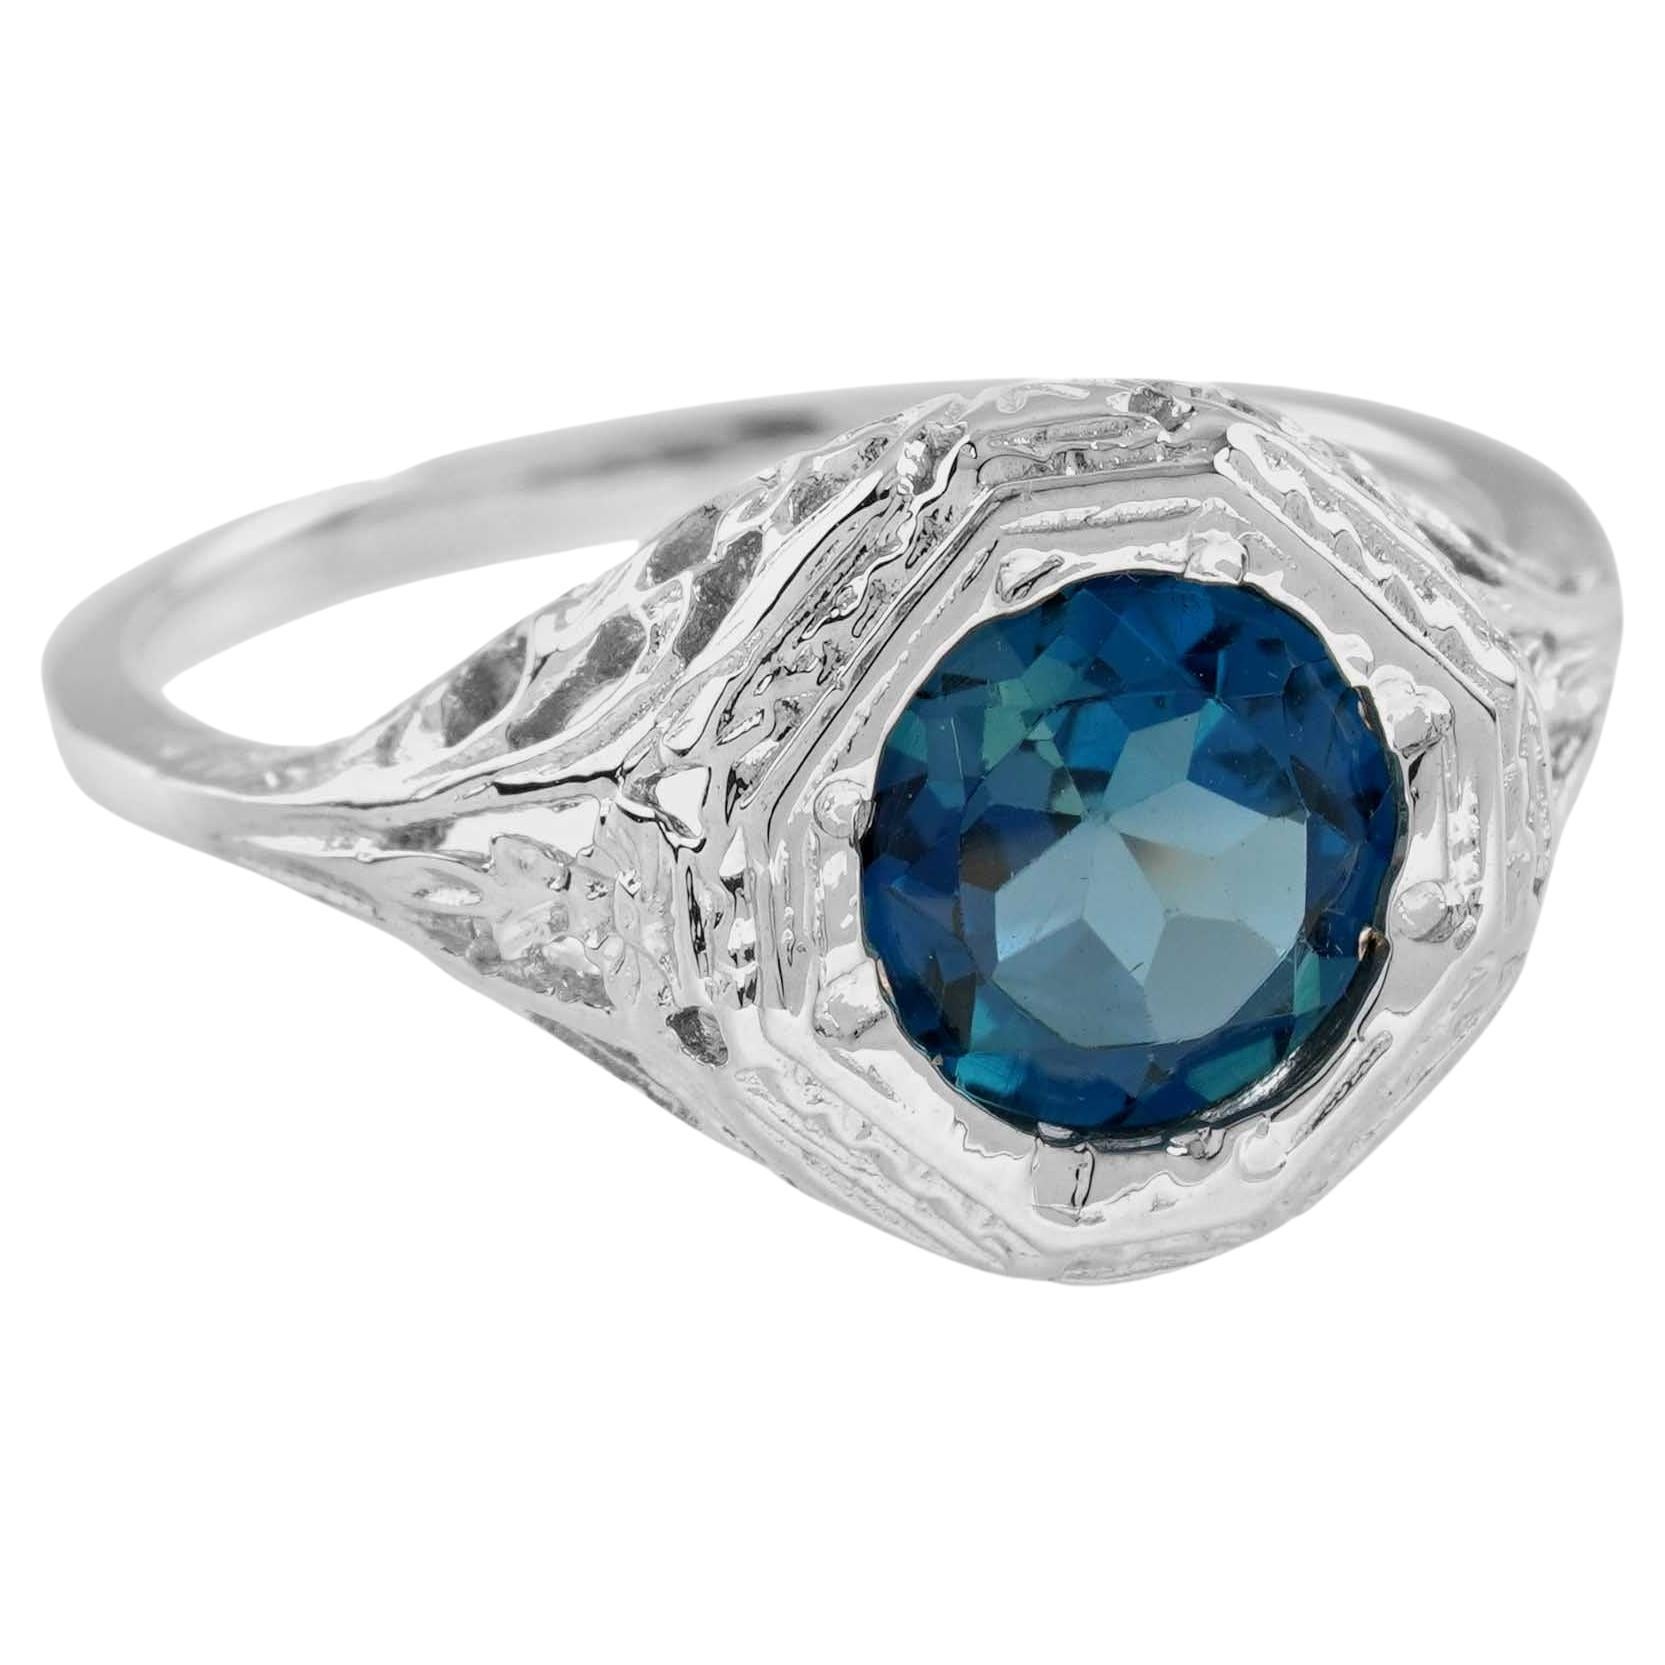 For Sale:  Natural London Blue Topaz Vintage Style Filigree Ring in Solid 9K White Gold